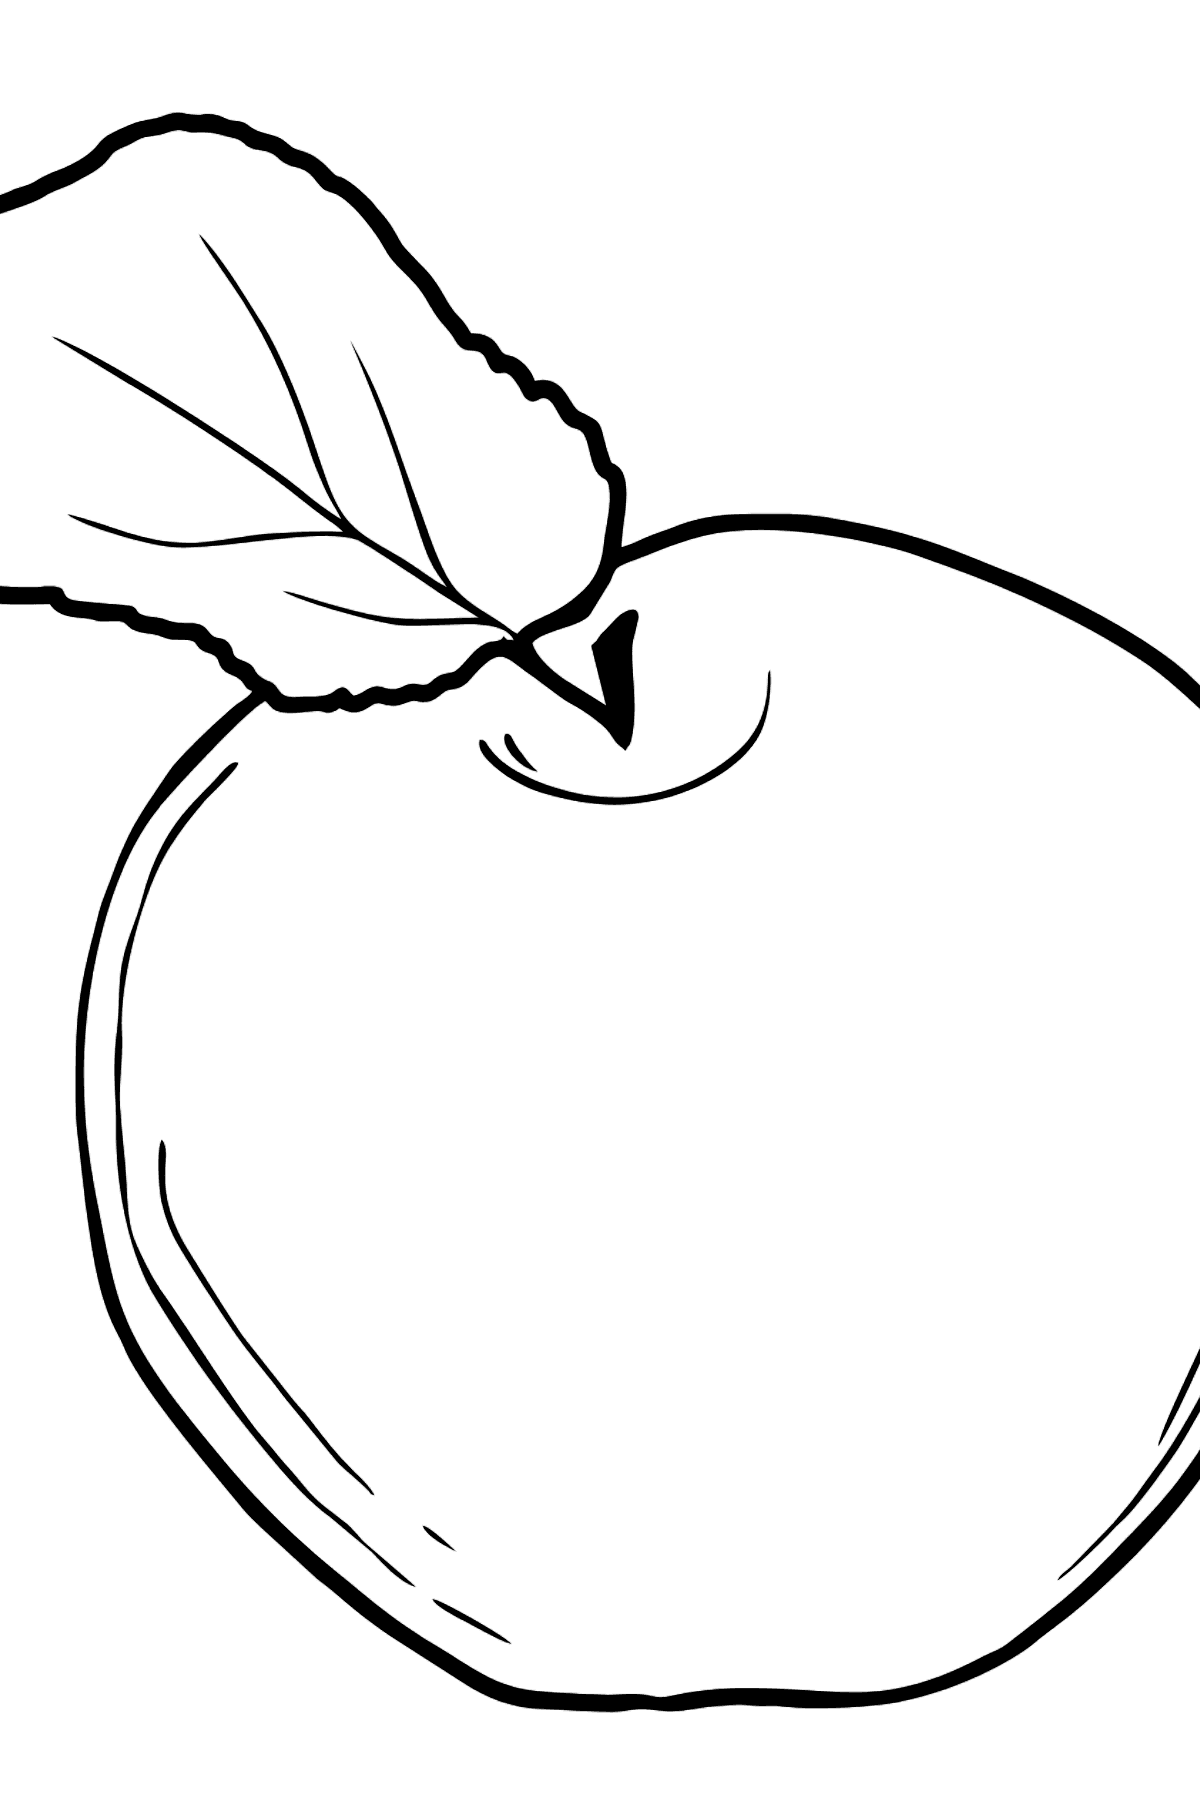 Apple coloring page - Coloring Pages for Kids